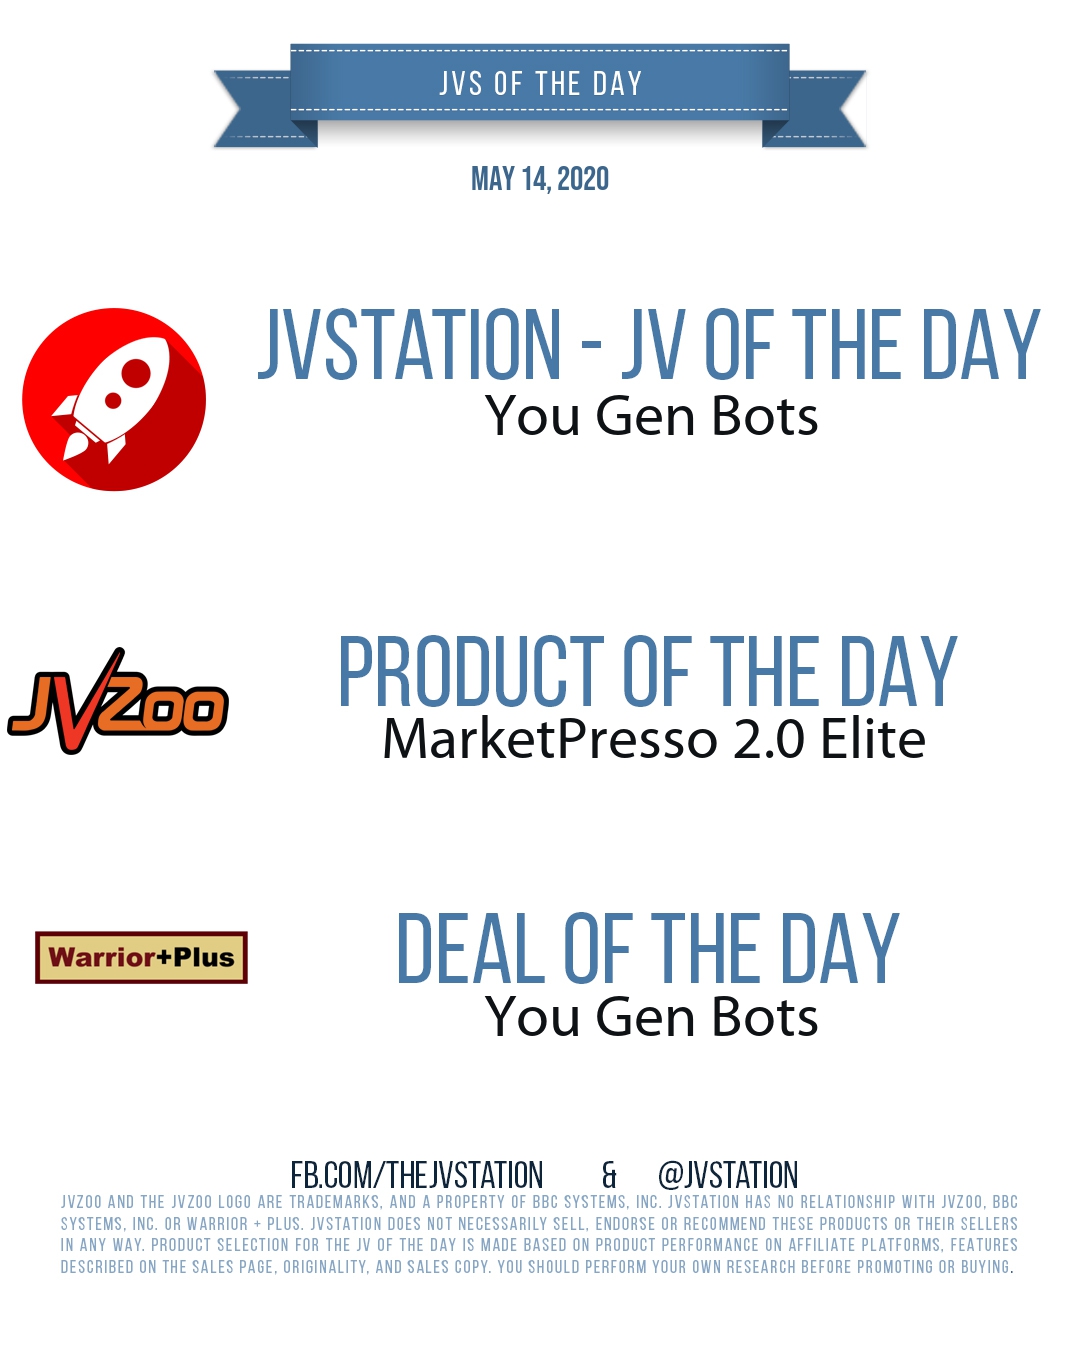 JVs of the day - May 14, 2020